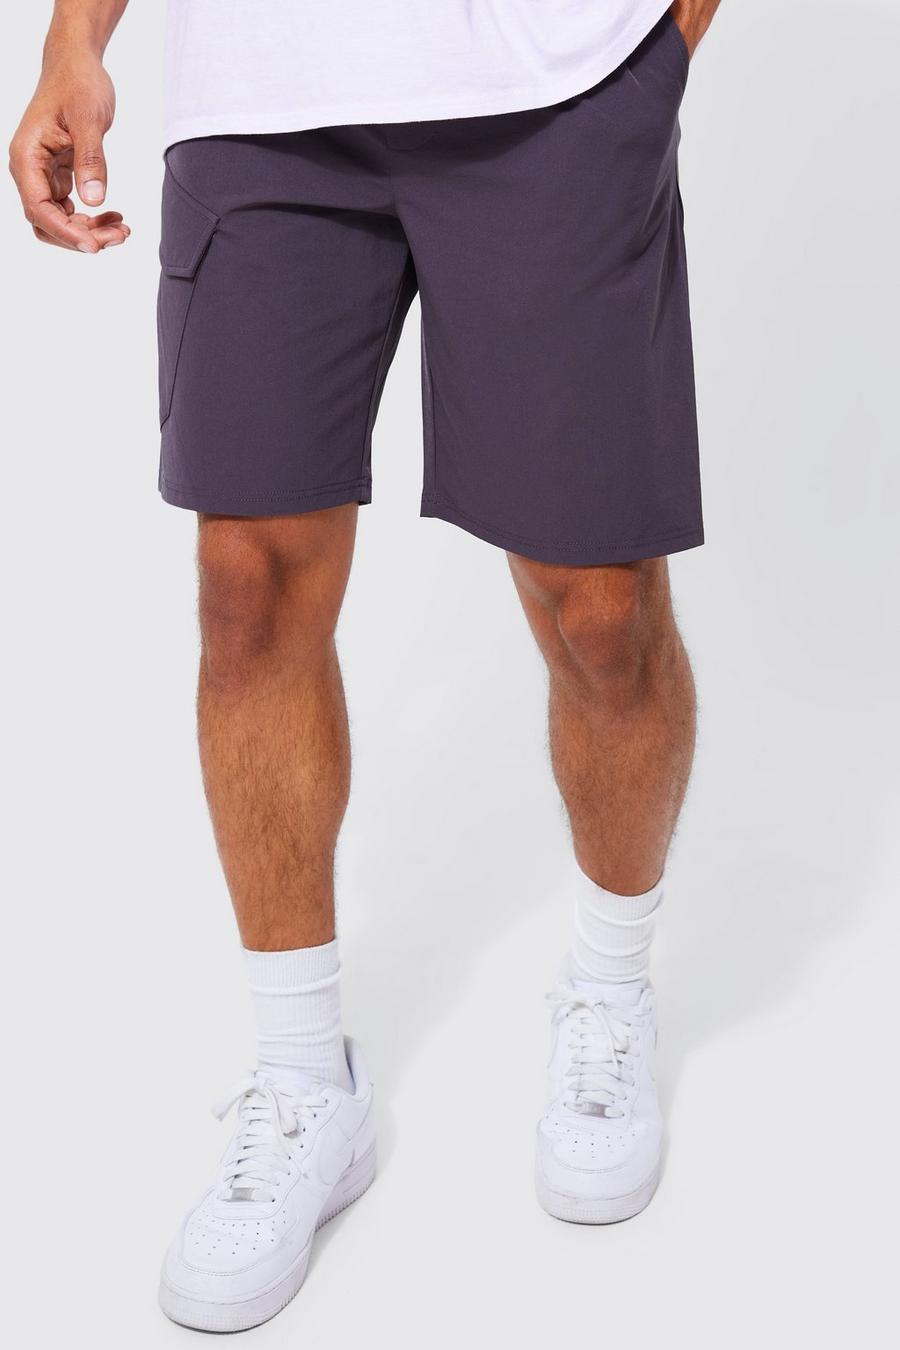 Charcoal Elastische Comfortabele Dunne Stretch Shorts